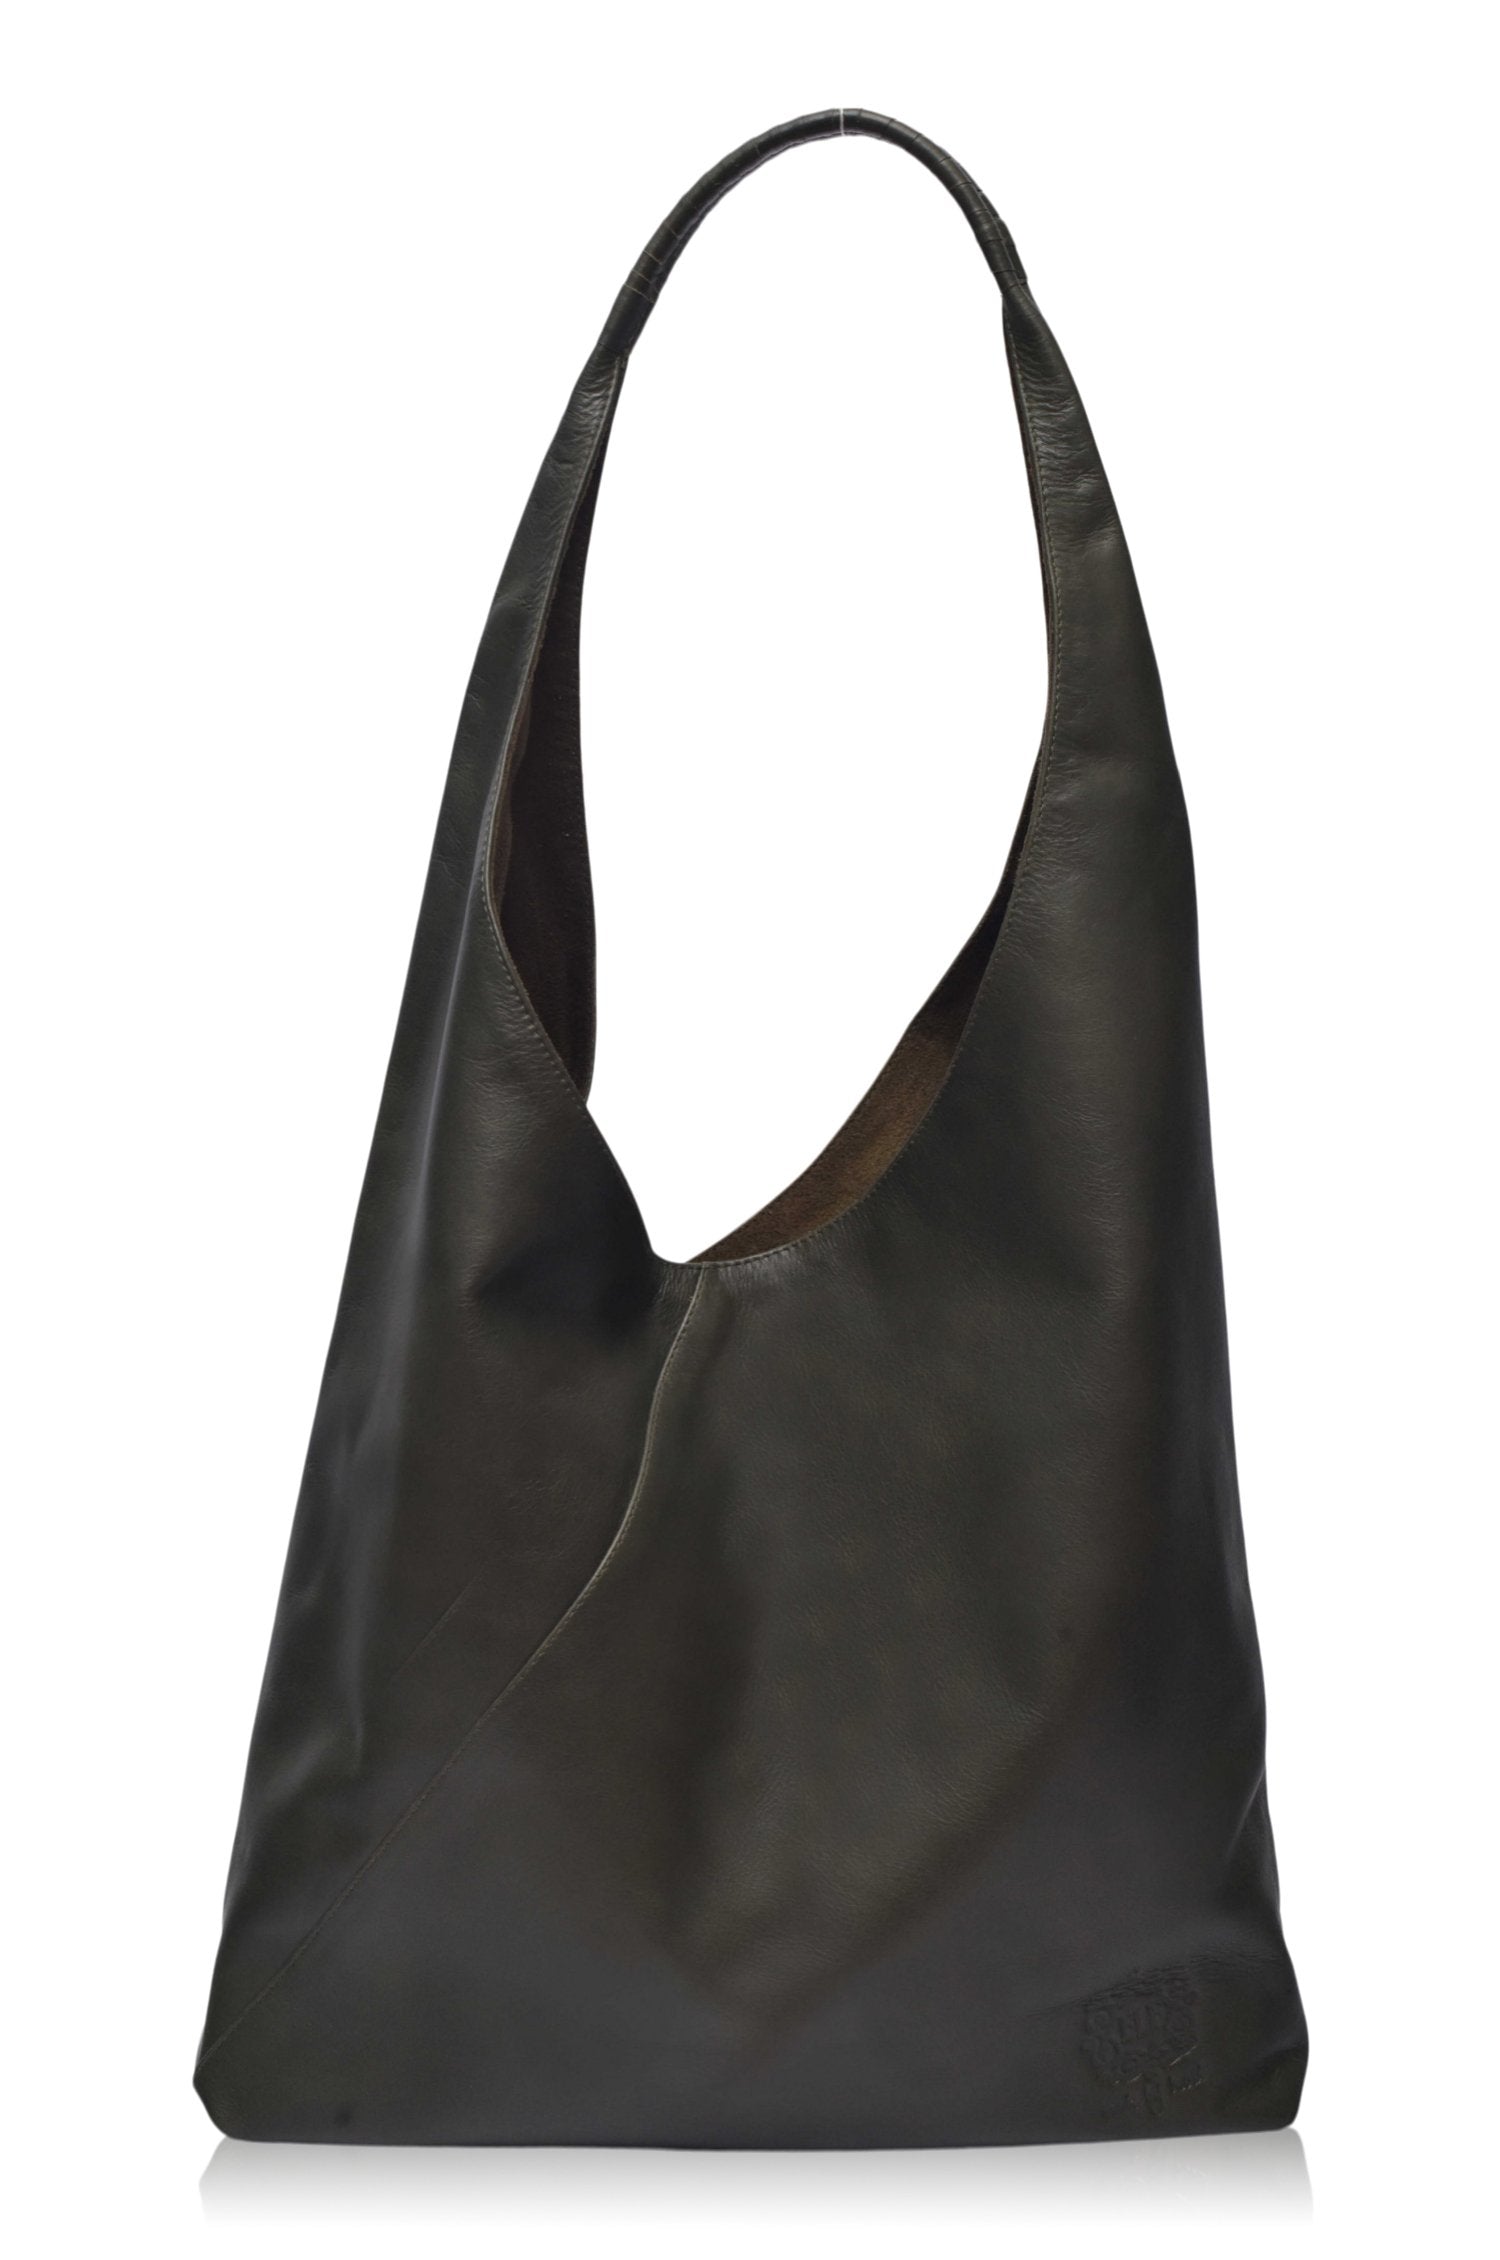 Women's leather tote bags and shopping bags